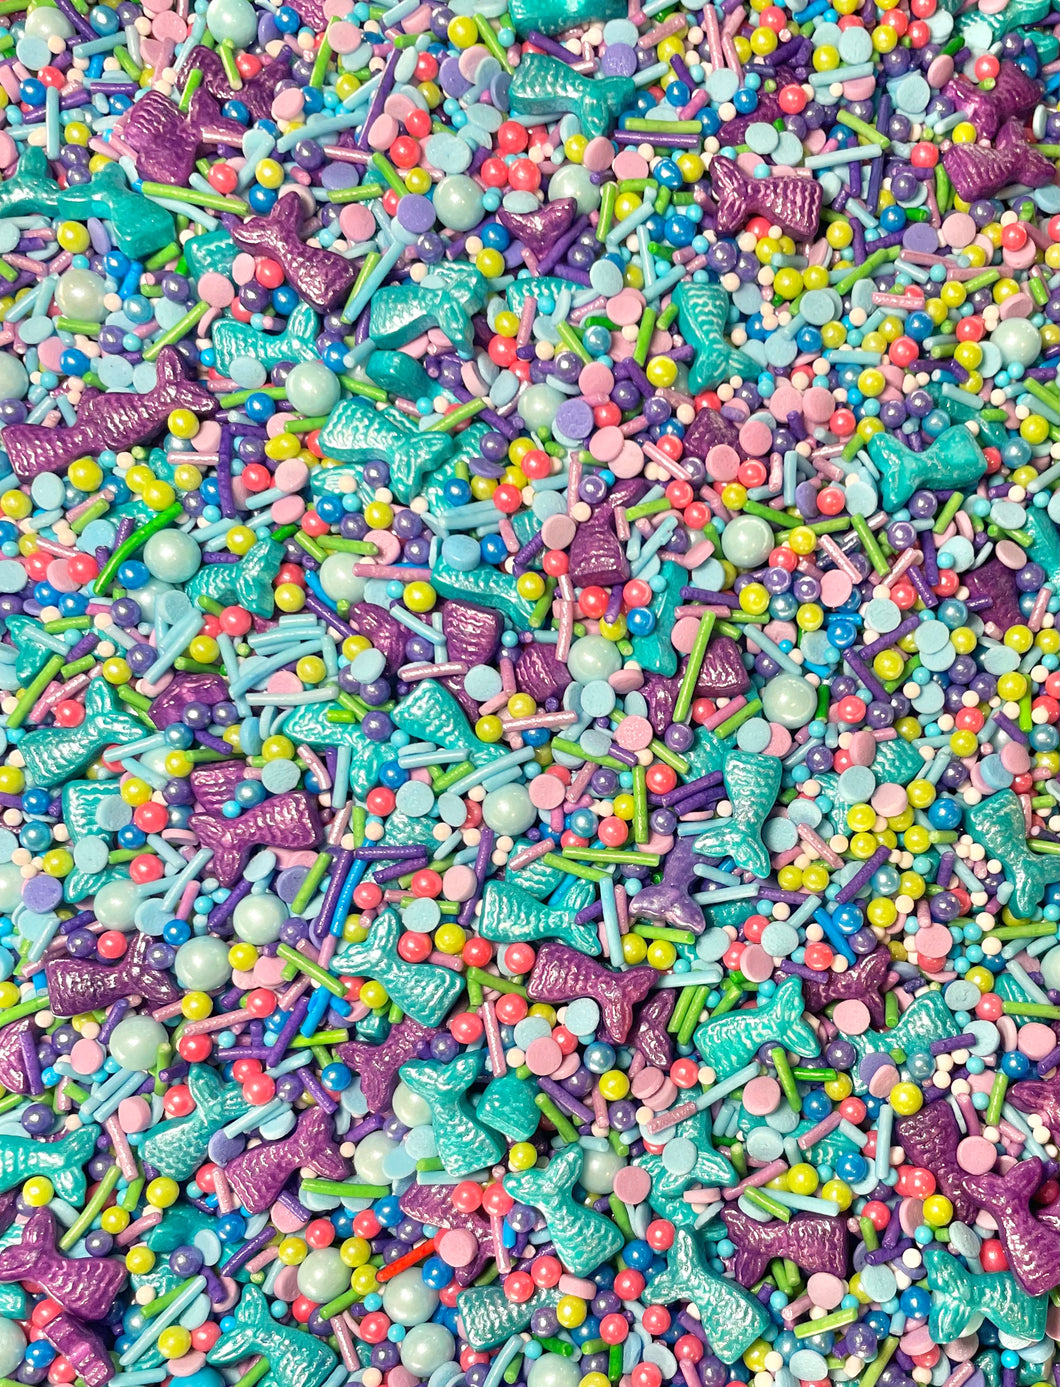 Tail's Up sprinkles blend | edible sprinkles, jimmies, nonpareils, quins, candy mermaid tails, sugar pearls | mermaid blend  | perfect for bakers that decorate cakes, cupcakes, or any sweet treat